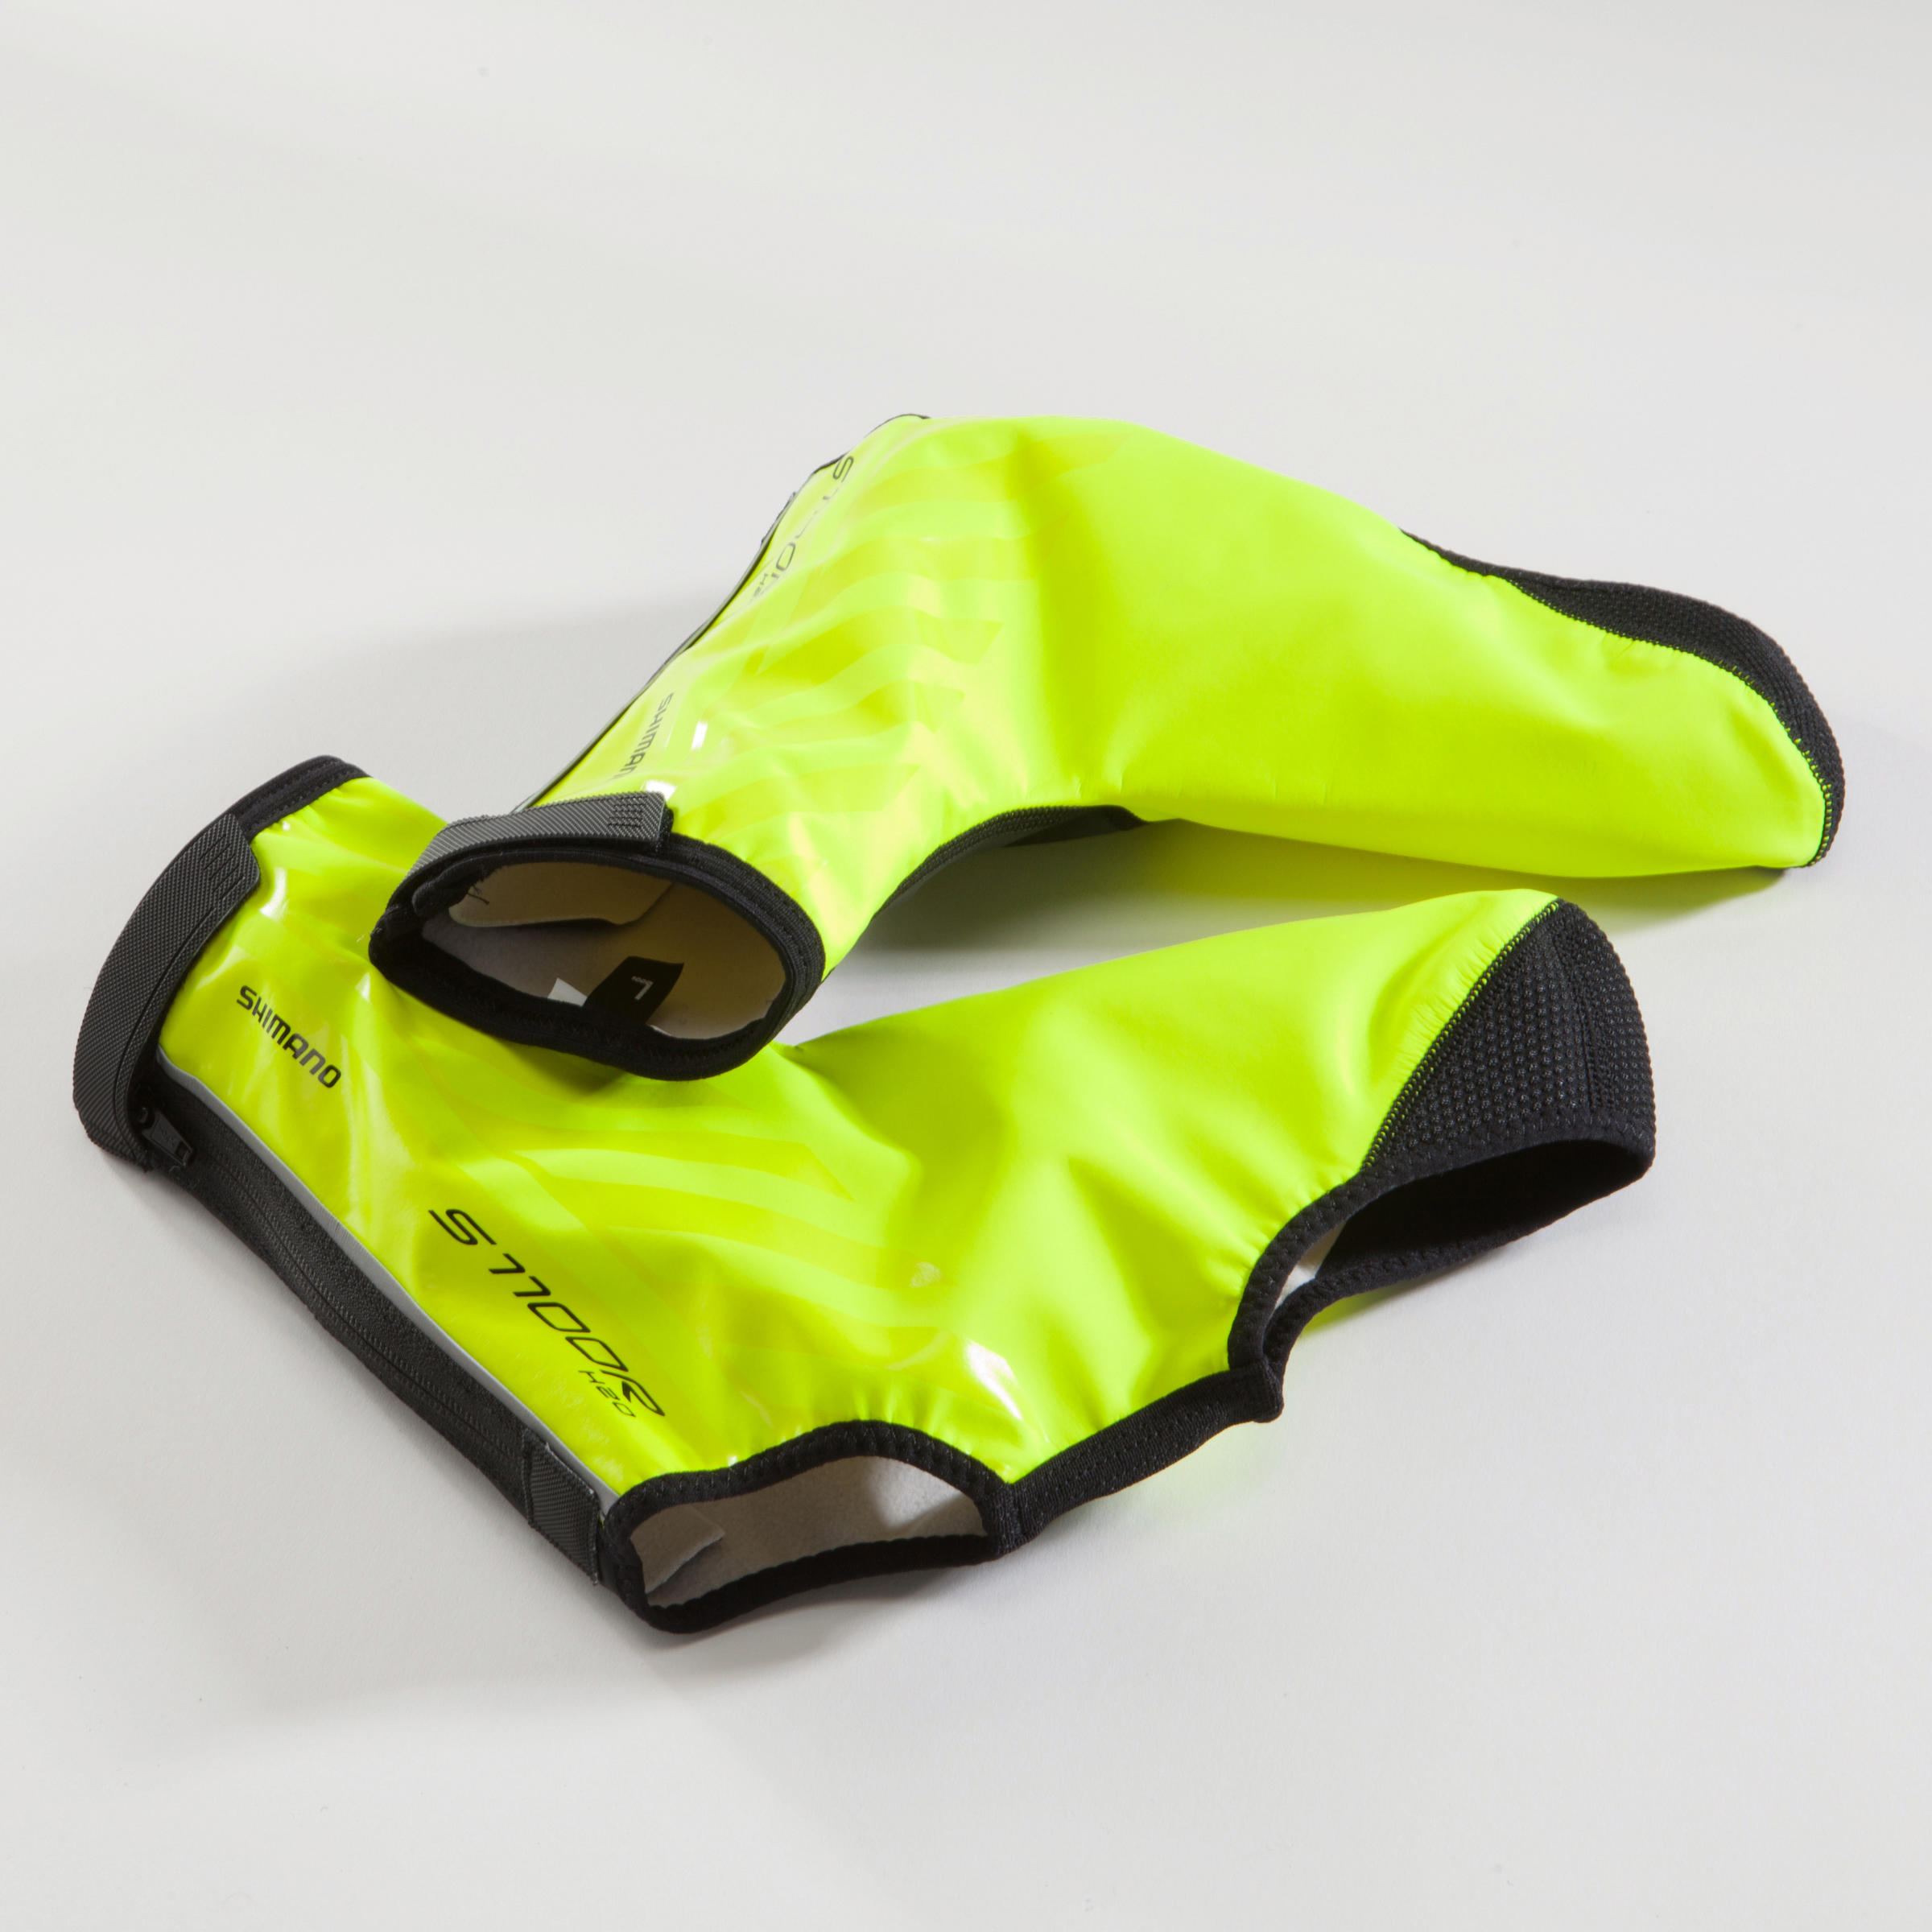 S1100R H2O Cycling Overshoes - Neon 8/8